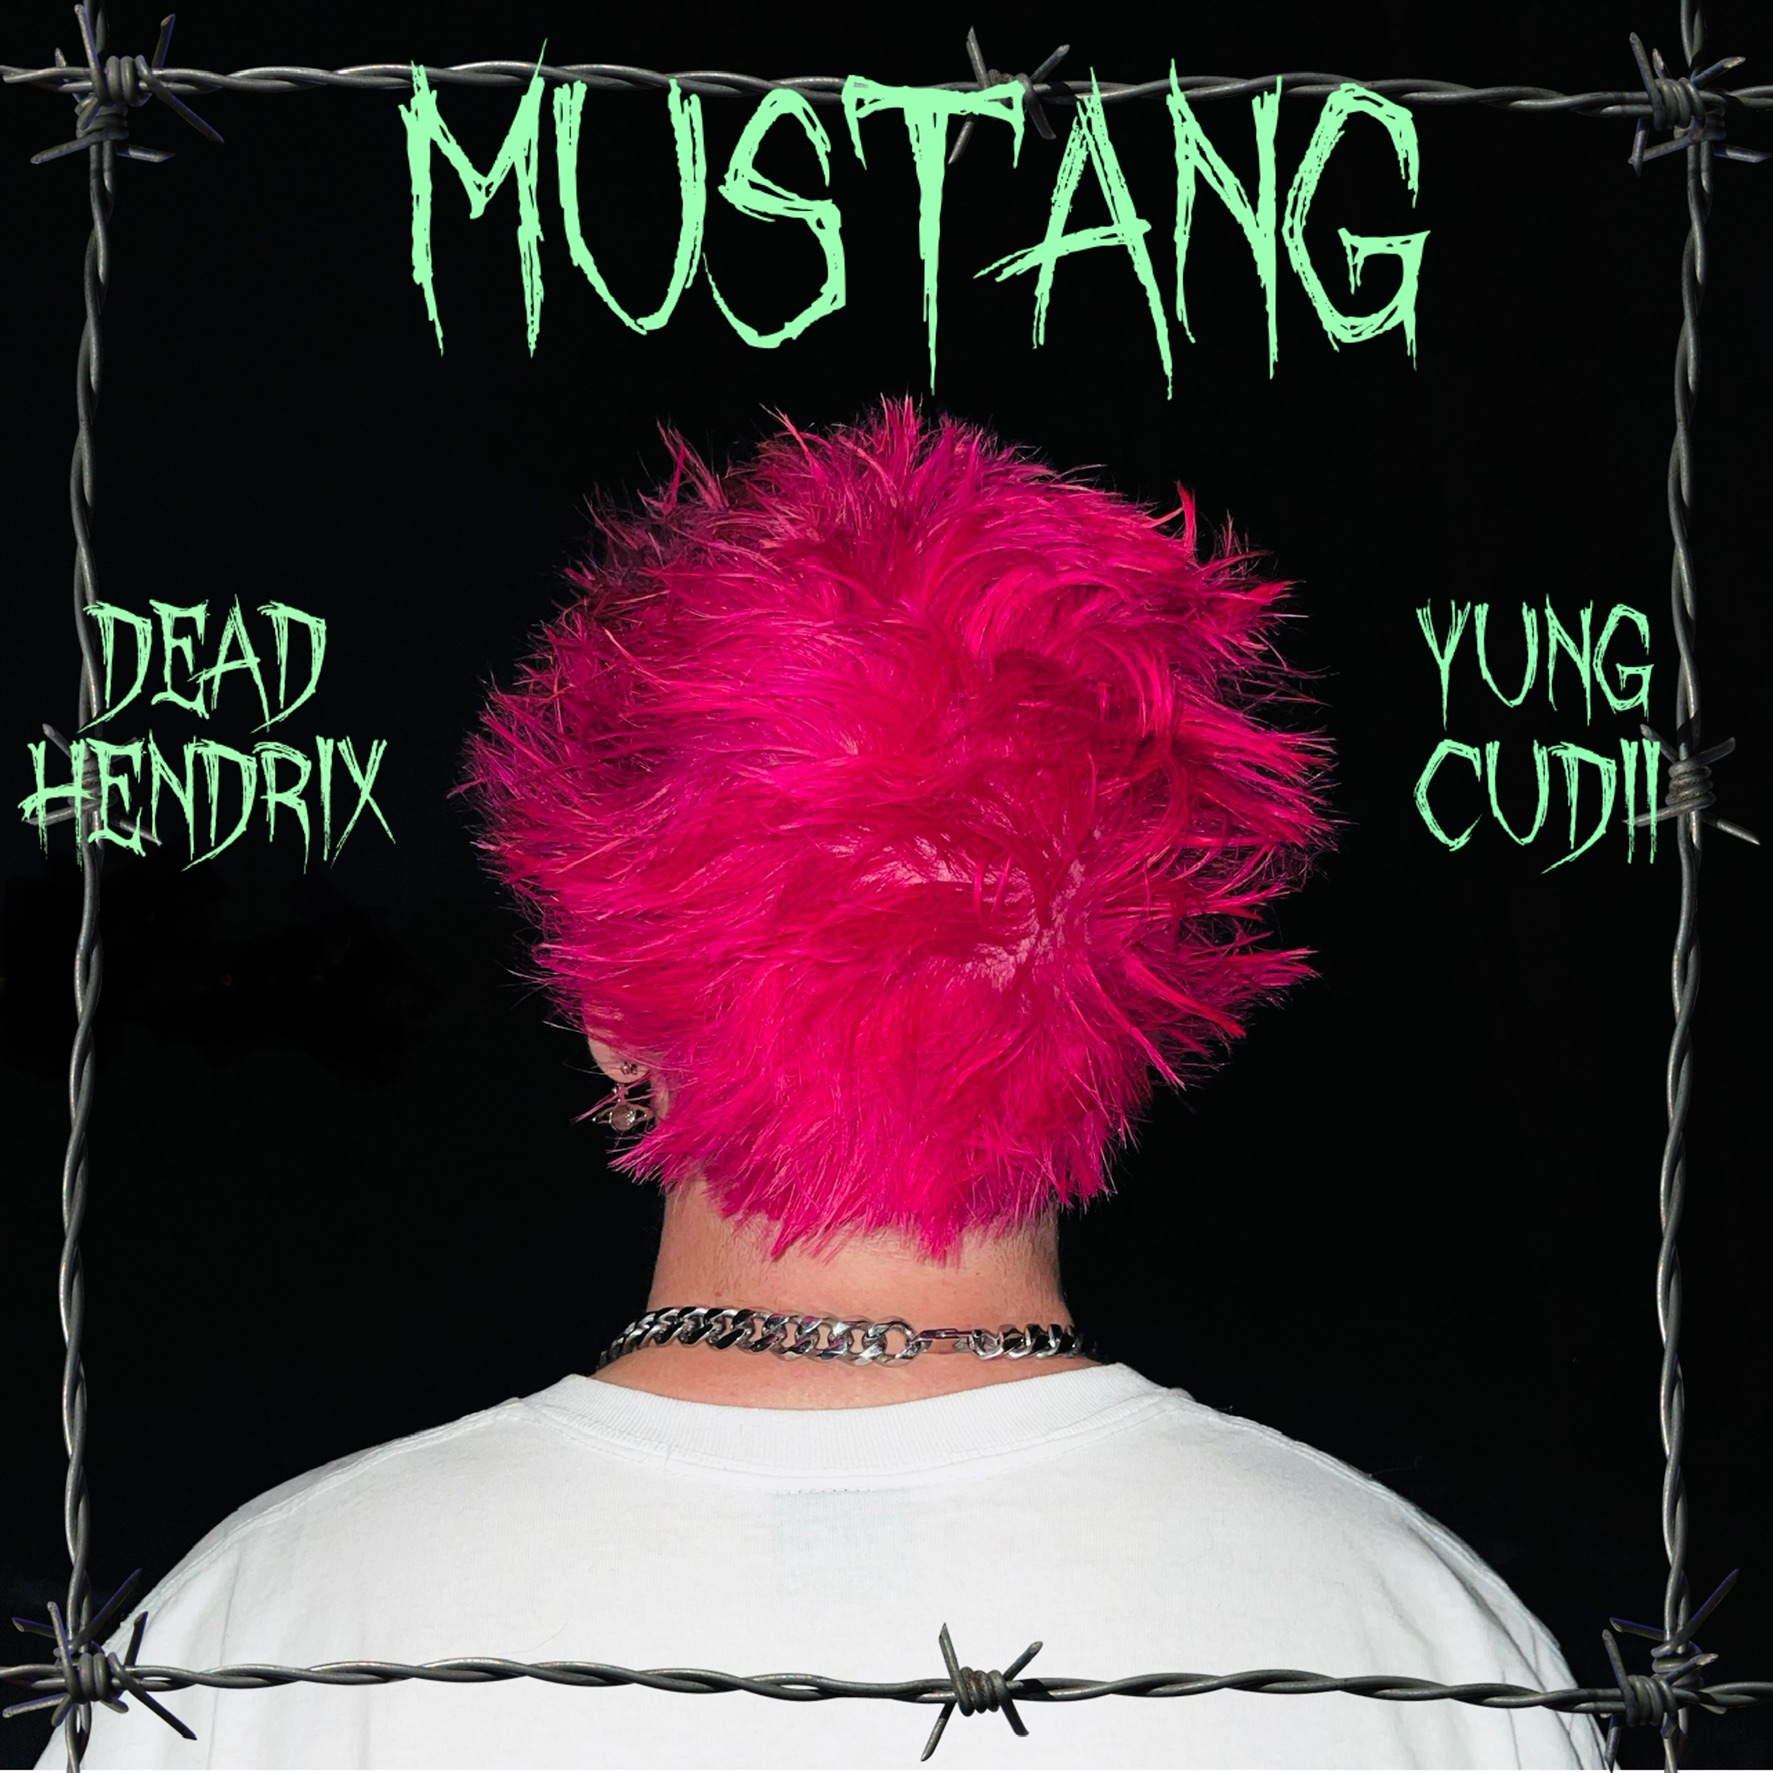 Dead Hendrix and Yungcudii have joined forces on a new single: Mustang